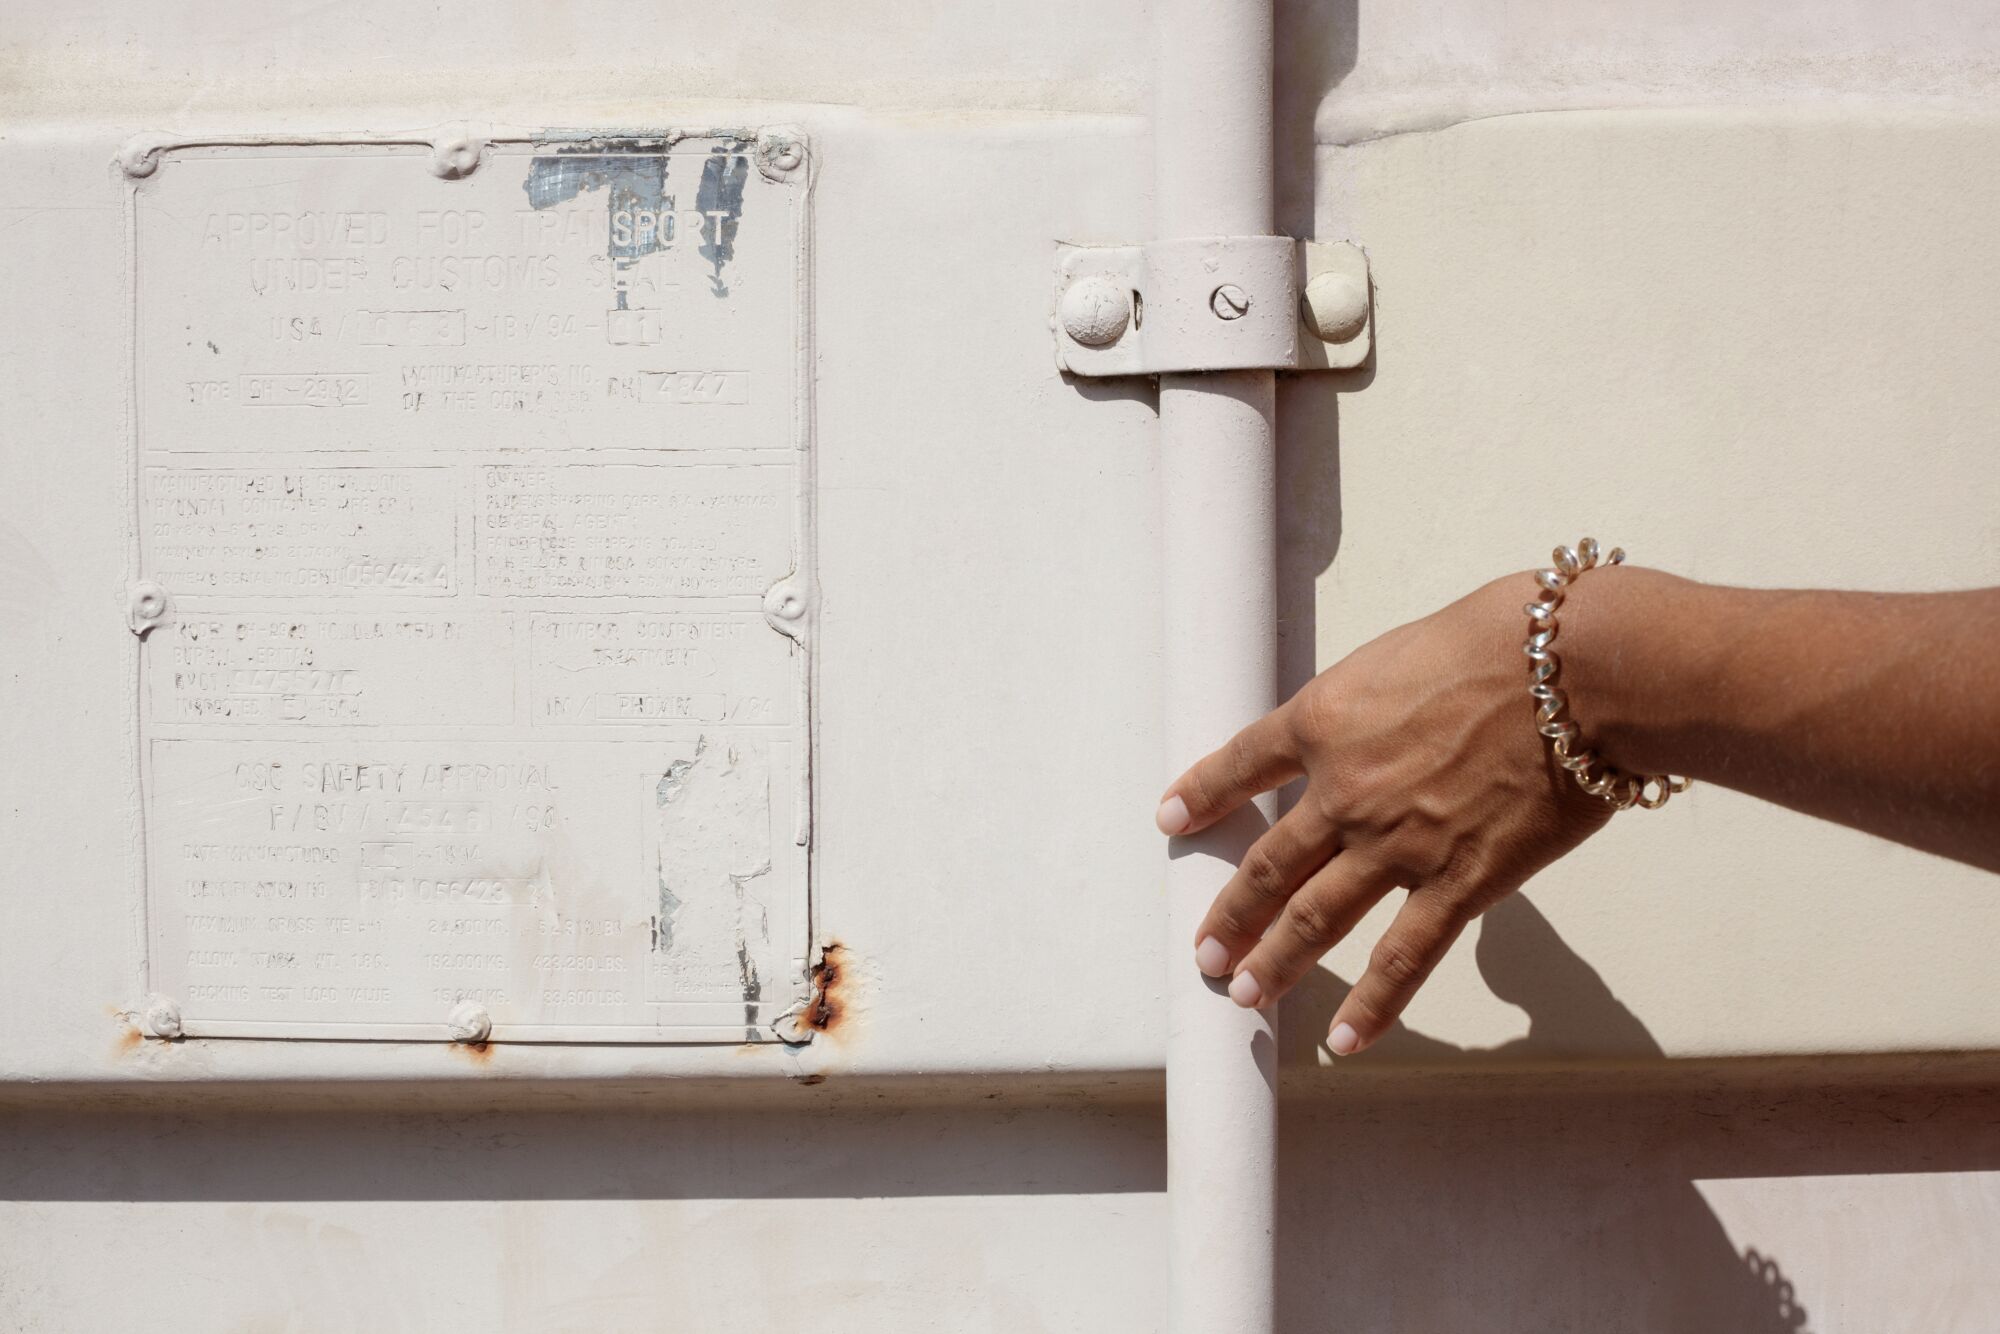 A closeup of Lacey Lennon’s hand touching a storage crate door.